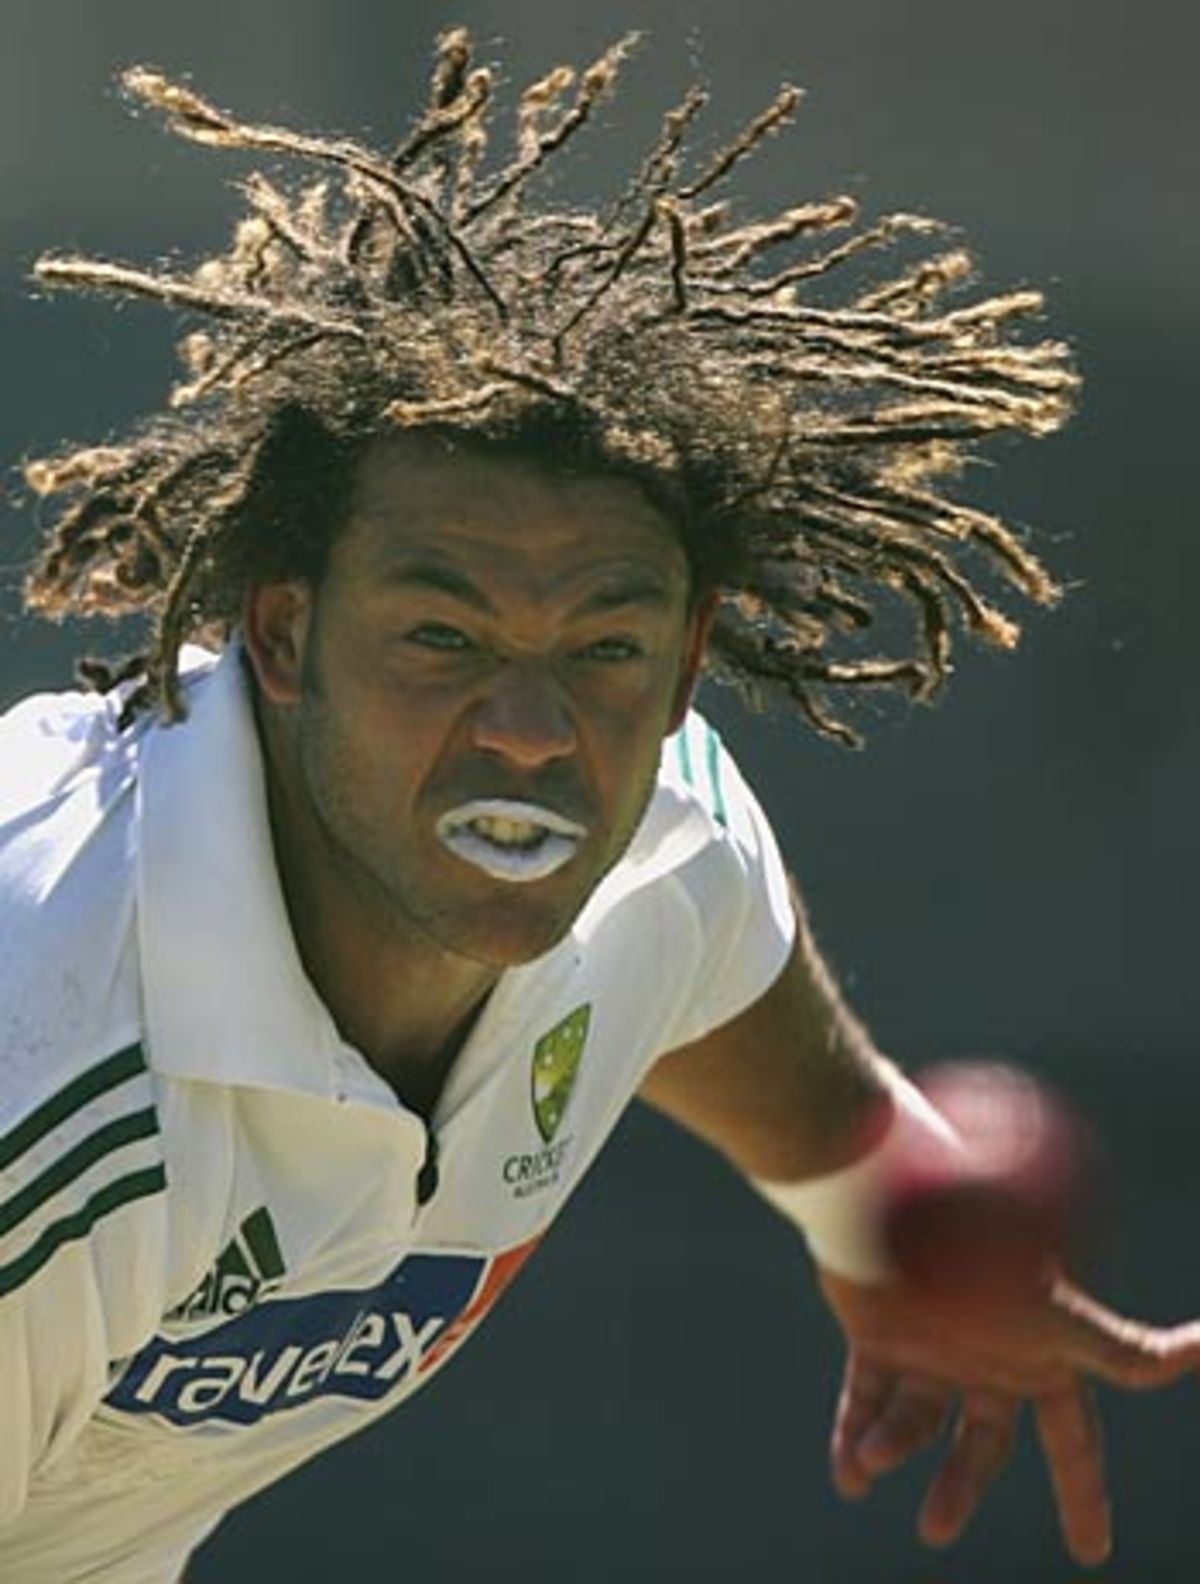 HOW TO HIT A SIX  ANDREW SYMONDS STYLE  YouTube